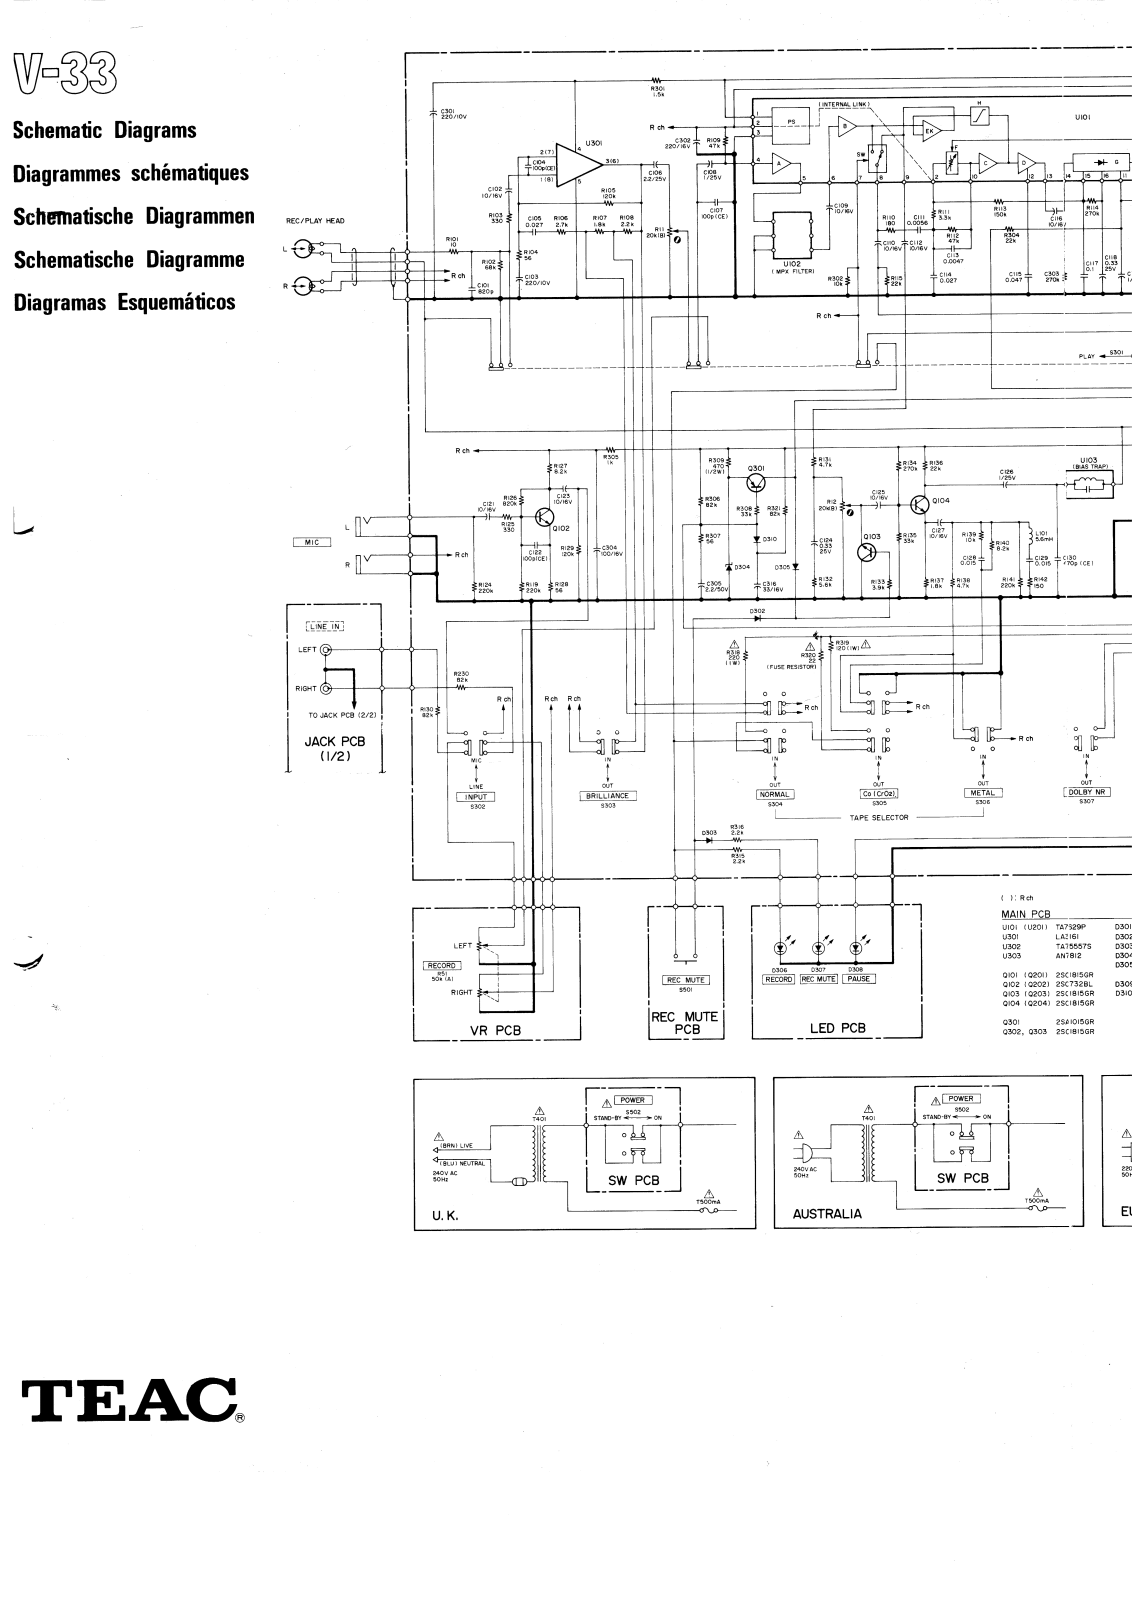 Teac V-33 Schematic